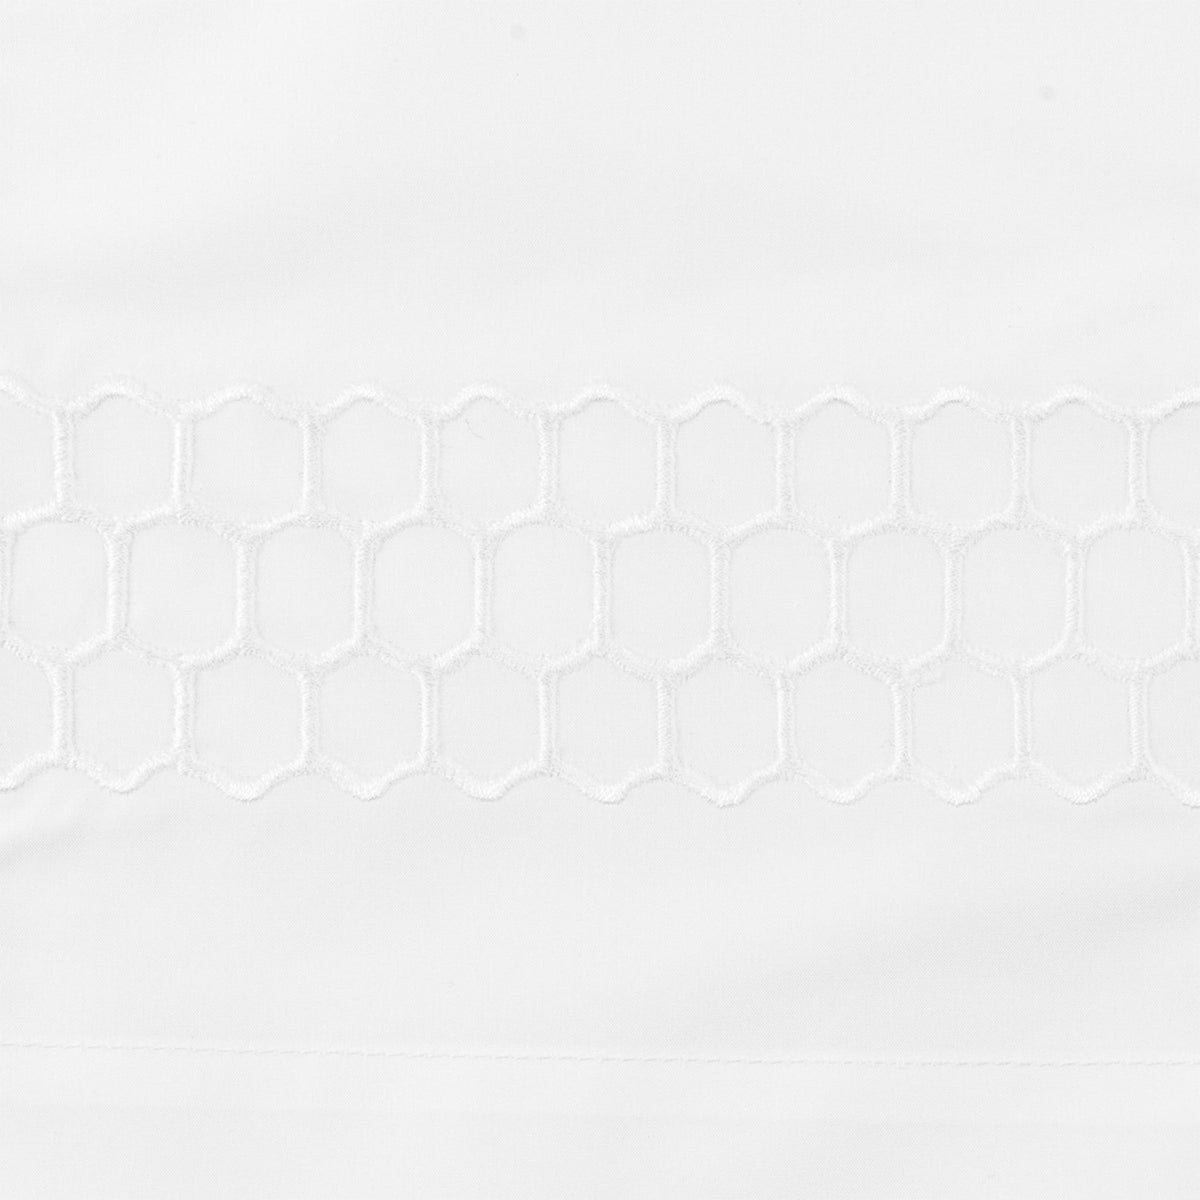 Swatch Sample of  Matouk Liana Bedding in White Color